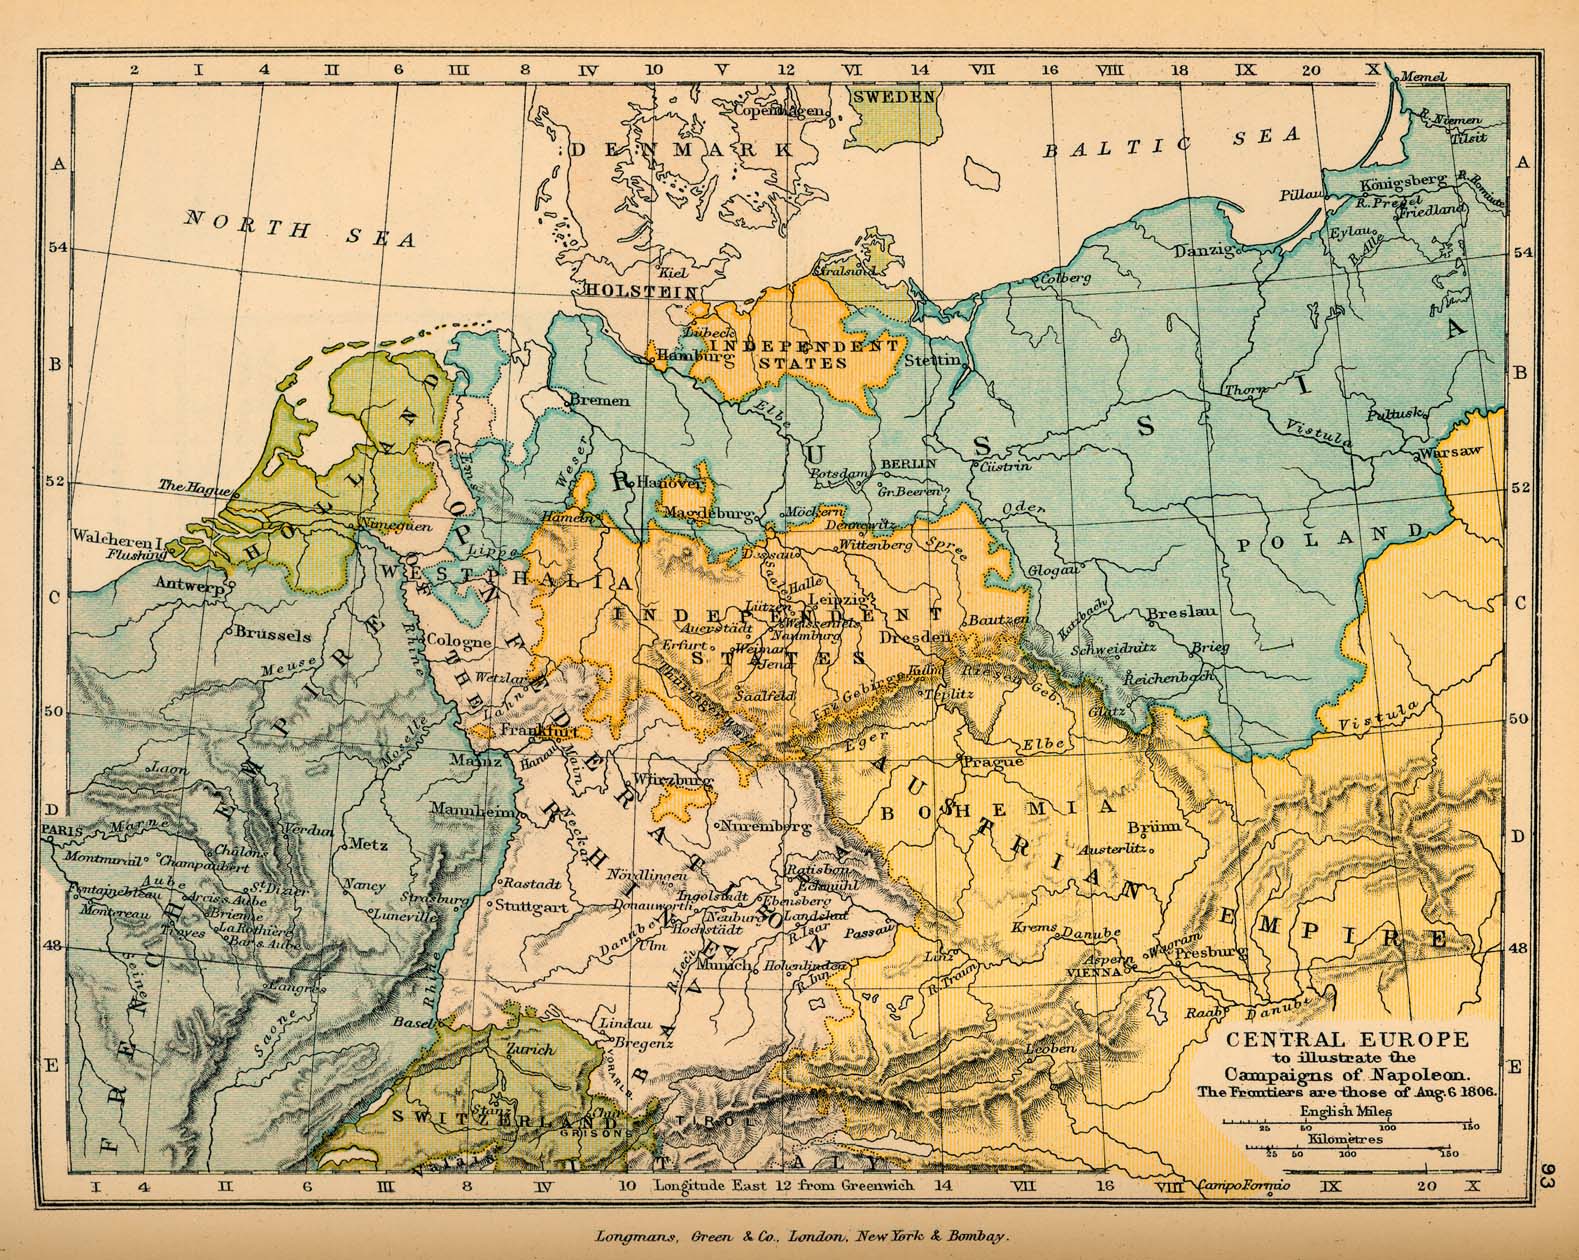 Map Of Europe During Napoleon